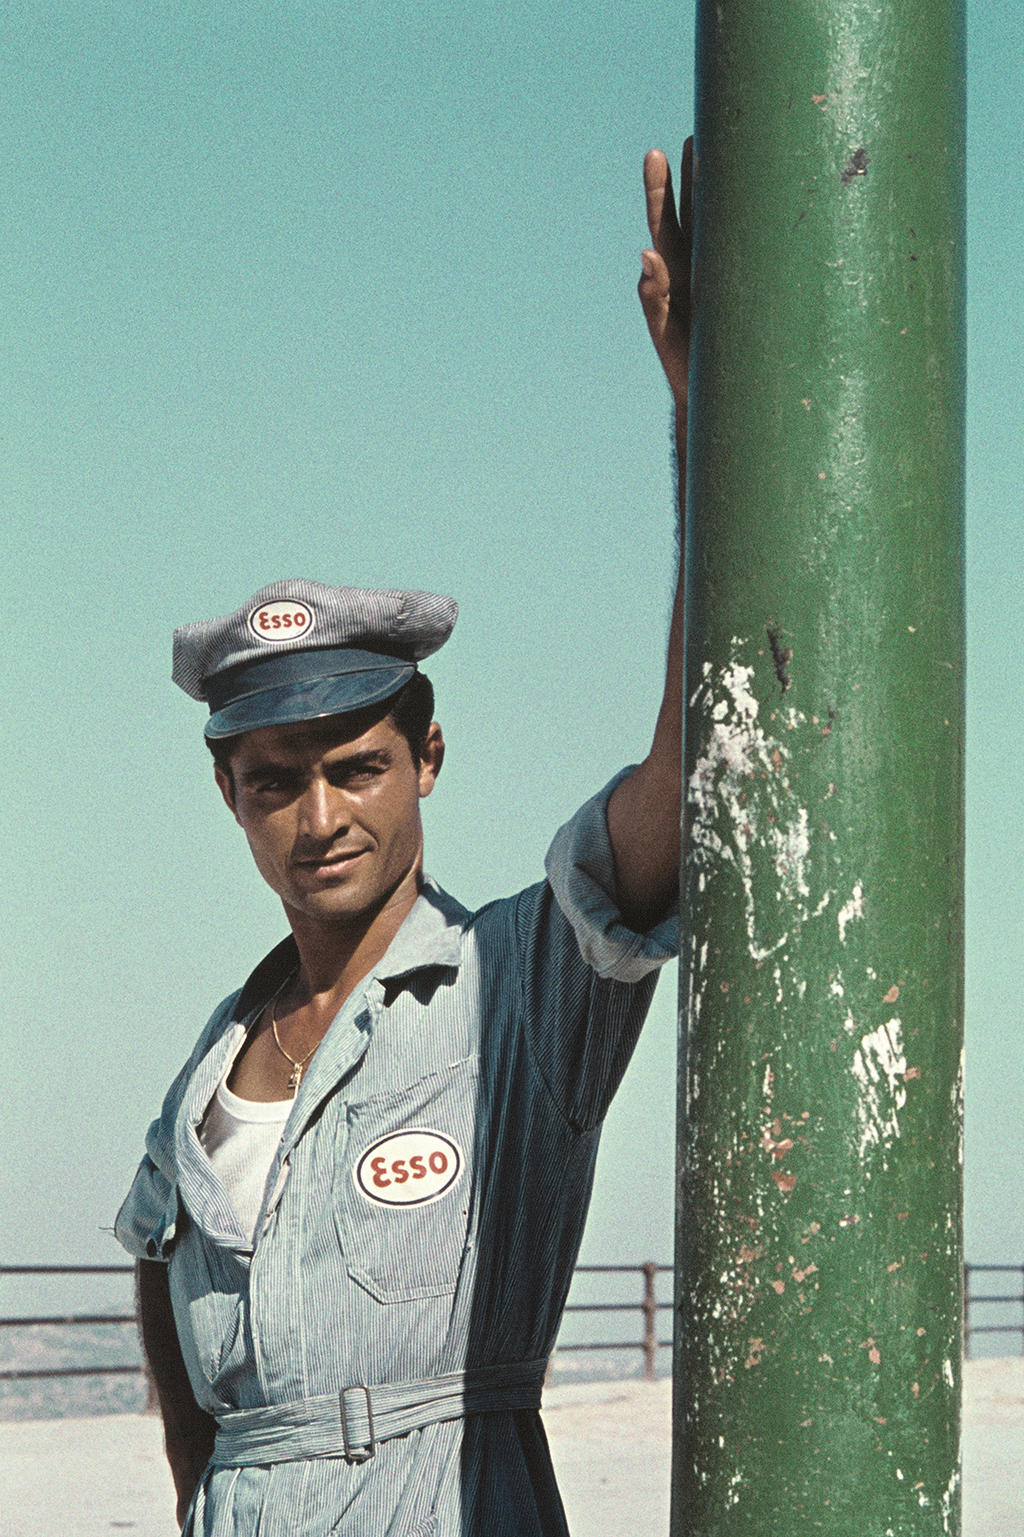 A man wearing an Esso uniform, stands with the length of his arm resting on a post.